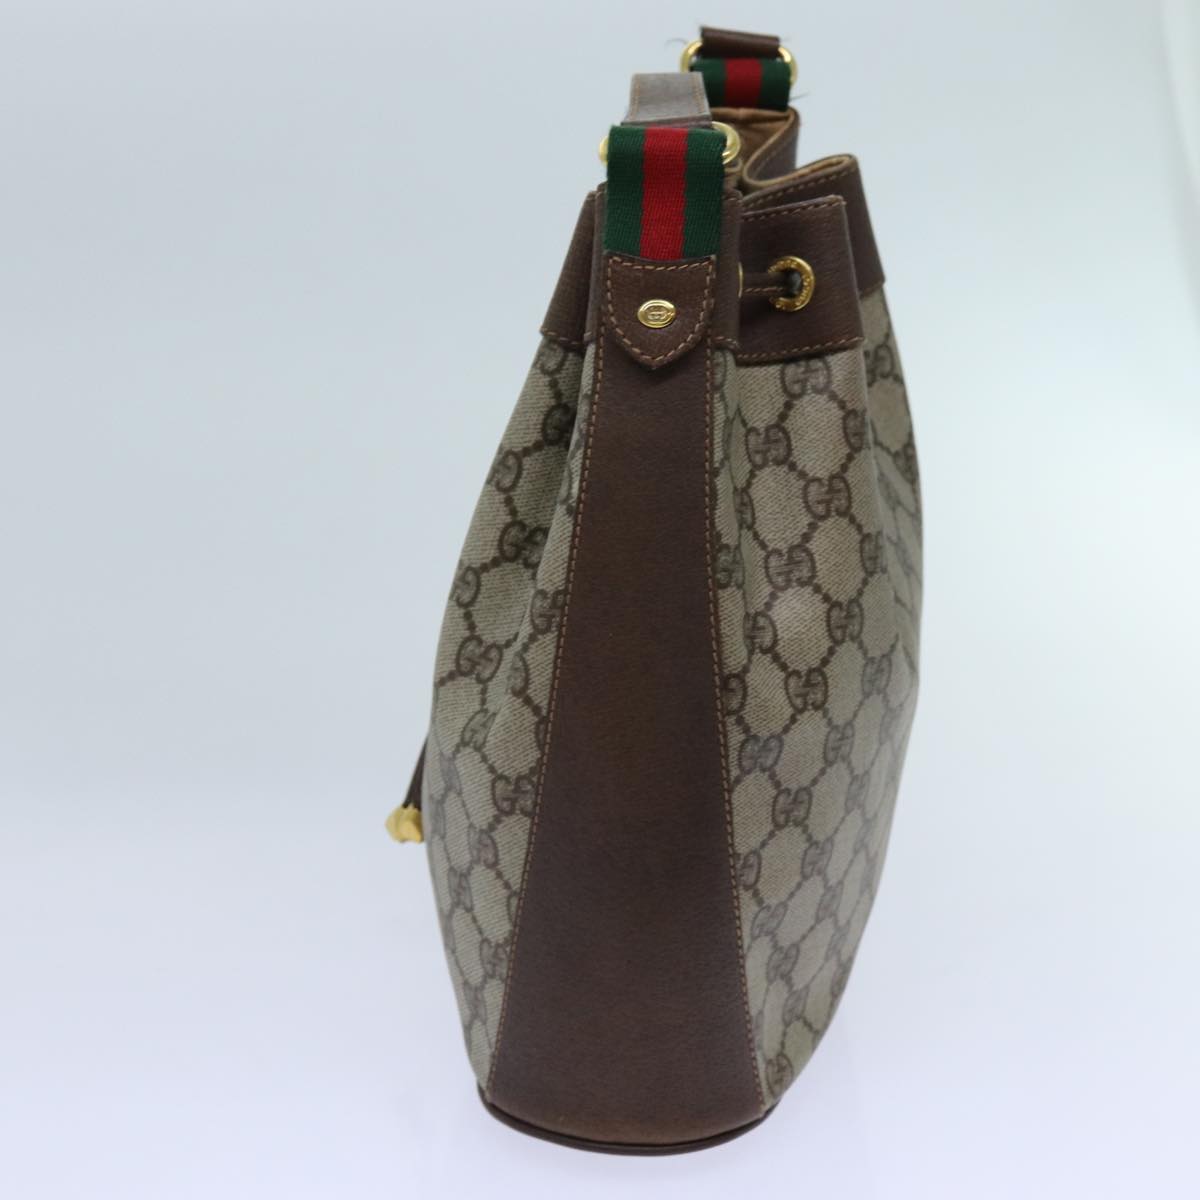 GUCCI GG Canvas Web Sherry Line Shoulder Bag PVC Beige Green Red Auth 71074